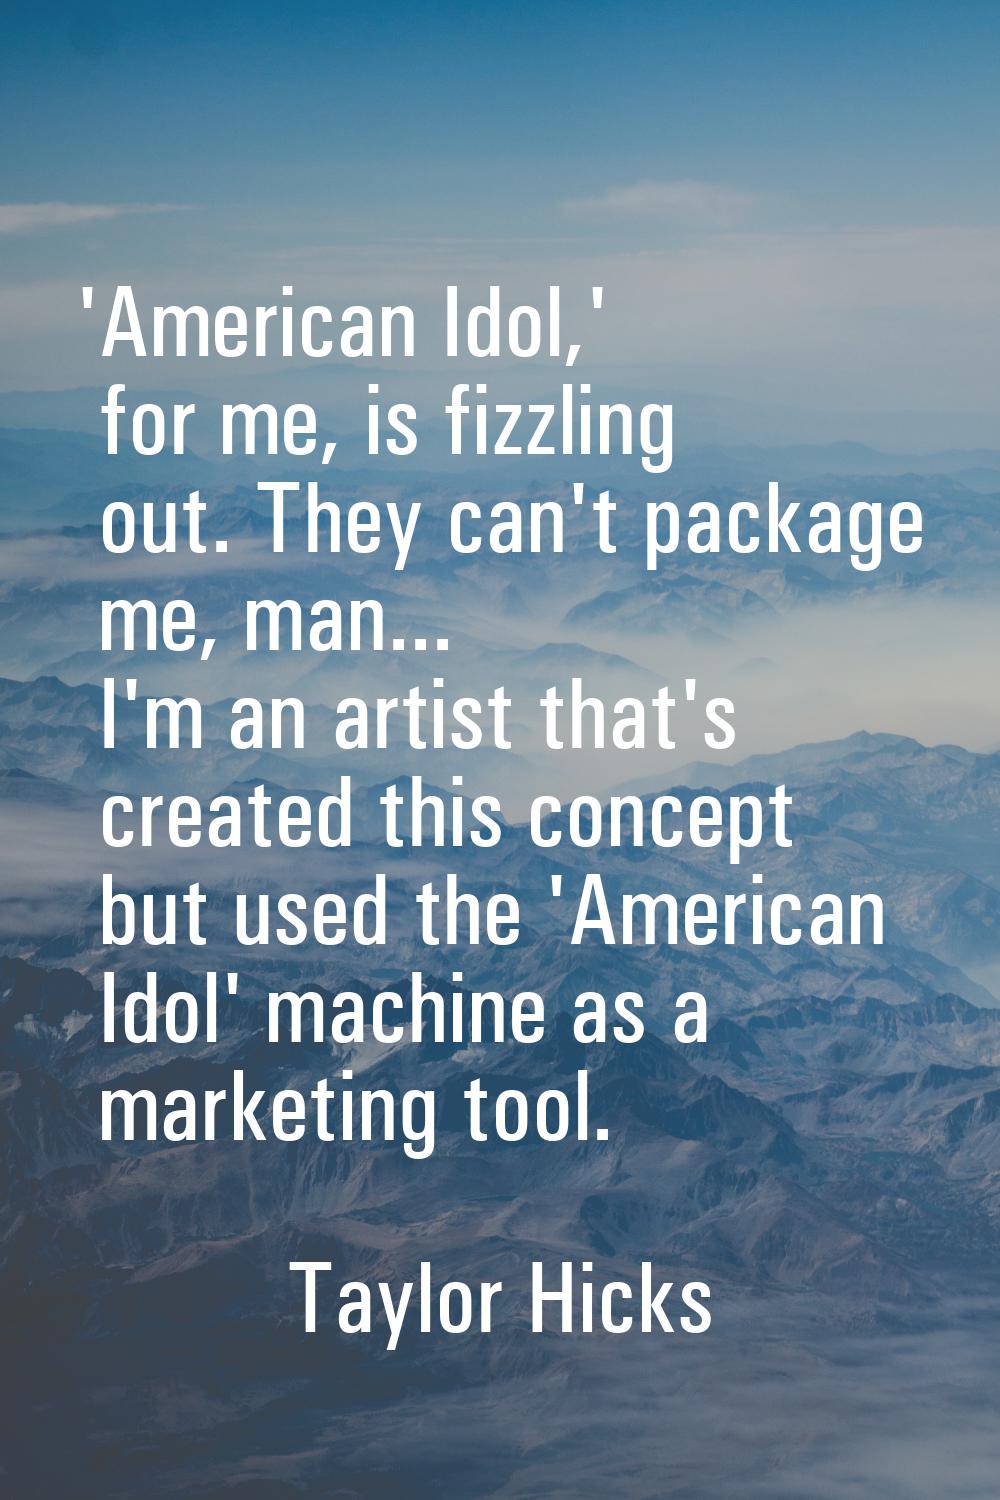 'American Idol,' for me, is fizzling out. They can't package me, man... I'm an artist that's create